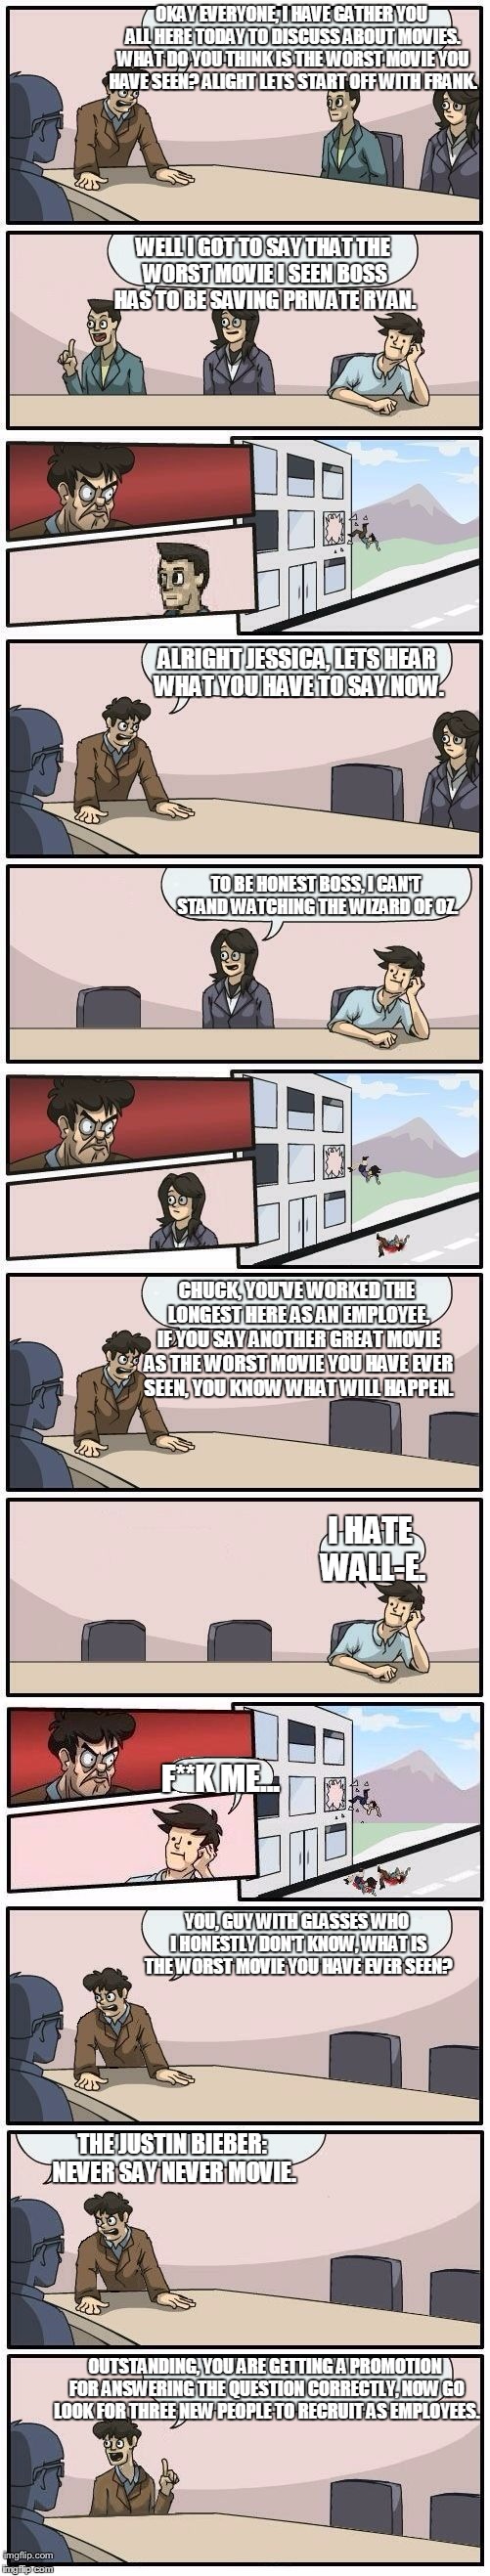 Boardroom Meeting For Discussion Of Worst Movie. | OKAY EVERYONE, I HAVE GATHER YOU ALL HERE TODAY TO DISCUSS ABOUT MOVIES. WHAT DO YOU THINK IS THE WORST MOVIE YOU HAVE SEEN? ALIGHT LETS STA | image tagged in memes,boardroom meeting suggestions extended,movies,bad movies,funny | made w/ Imgflip meme maker